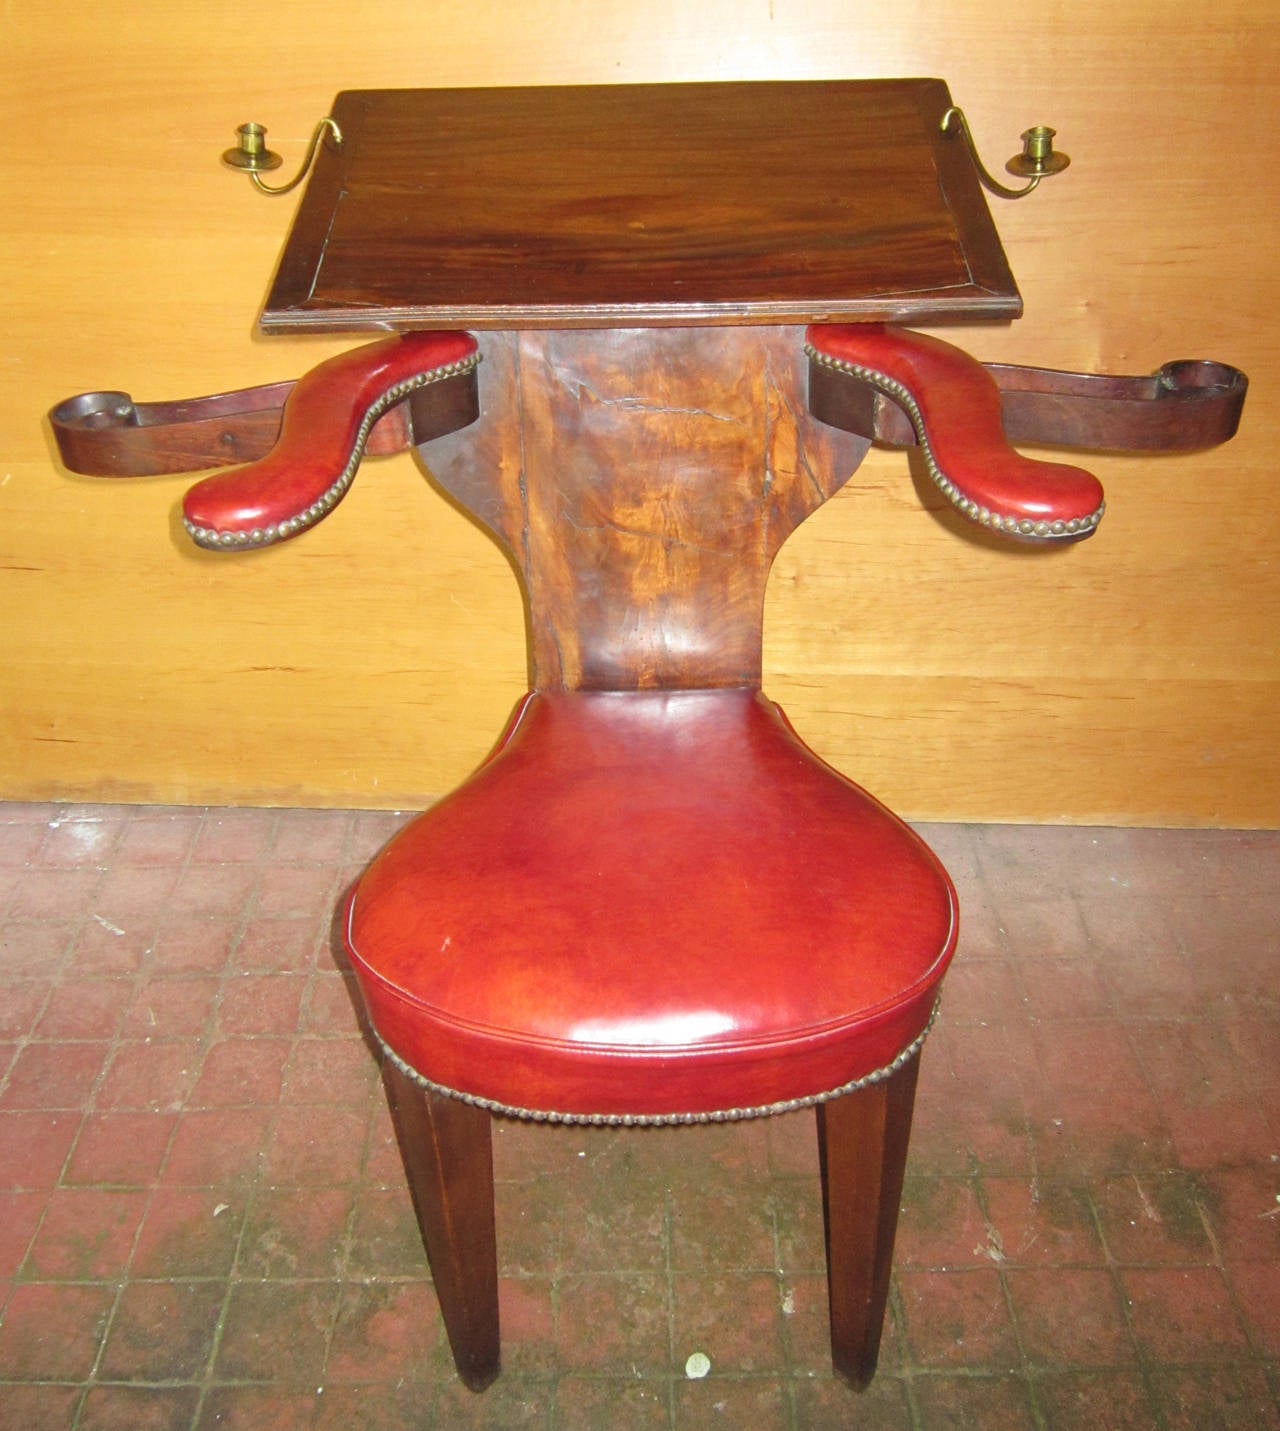 Great Britain (UK) English Regency Reading Chair in Mahogany with Red Leather, Original Brasses For Sale